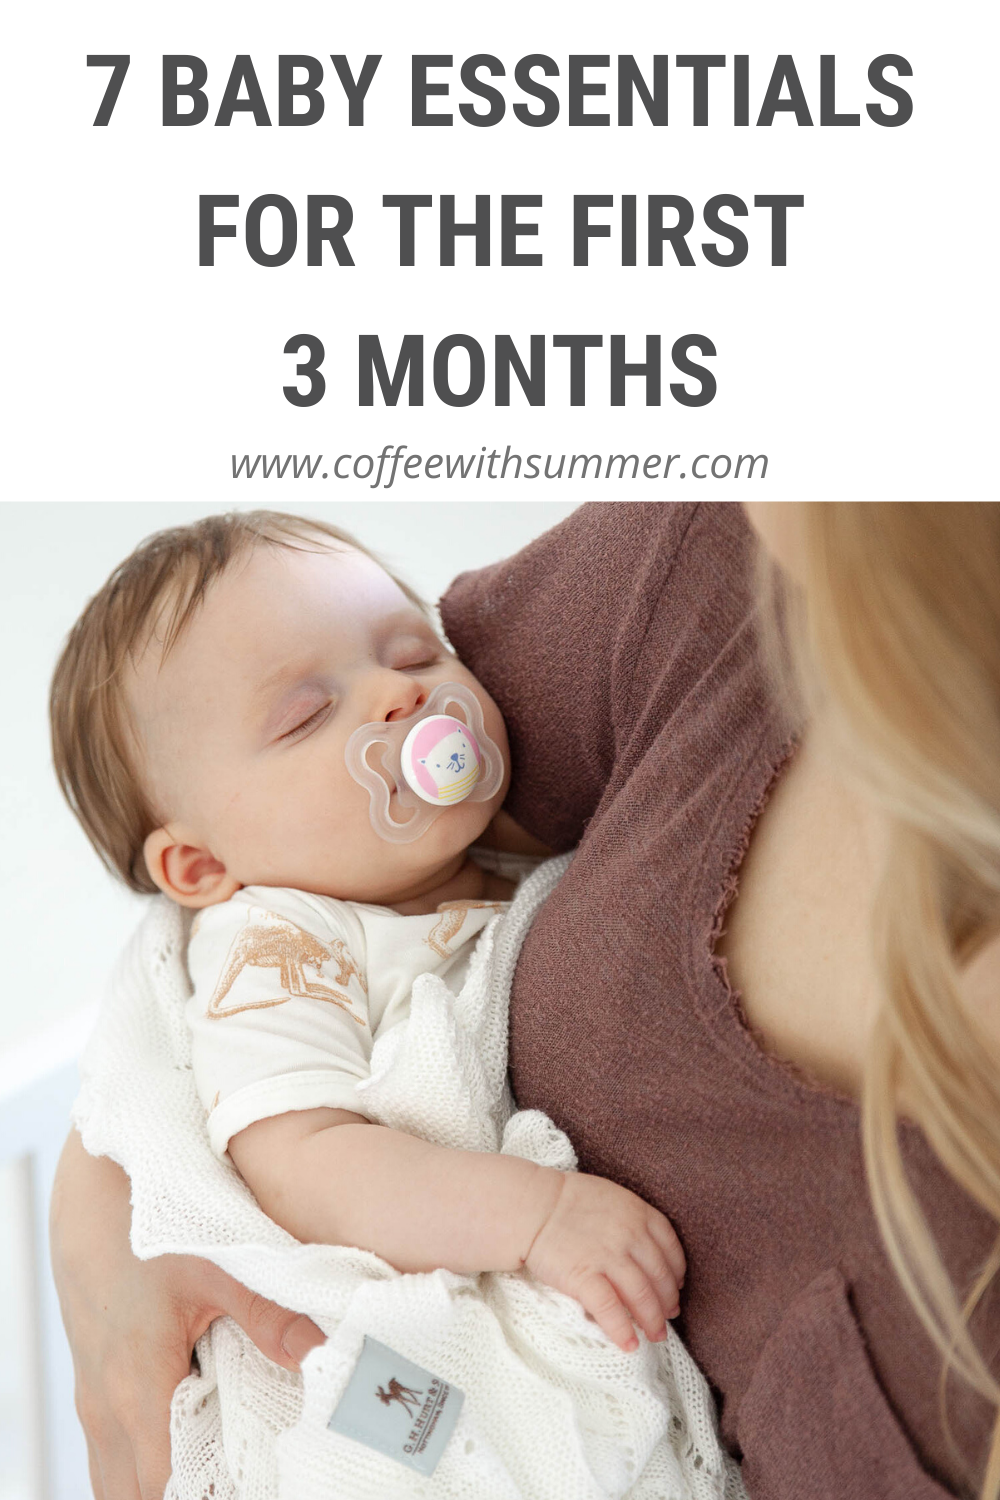 https://www.coffeewithsummer.com/wp-content/uploads/2020/06/baby-essentials-for-the-first-3-months.png